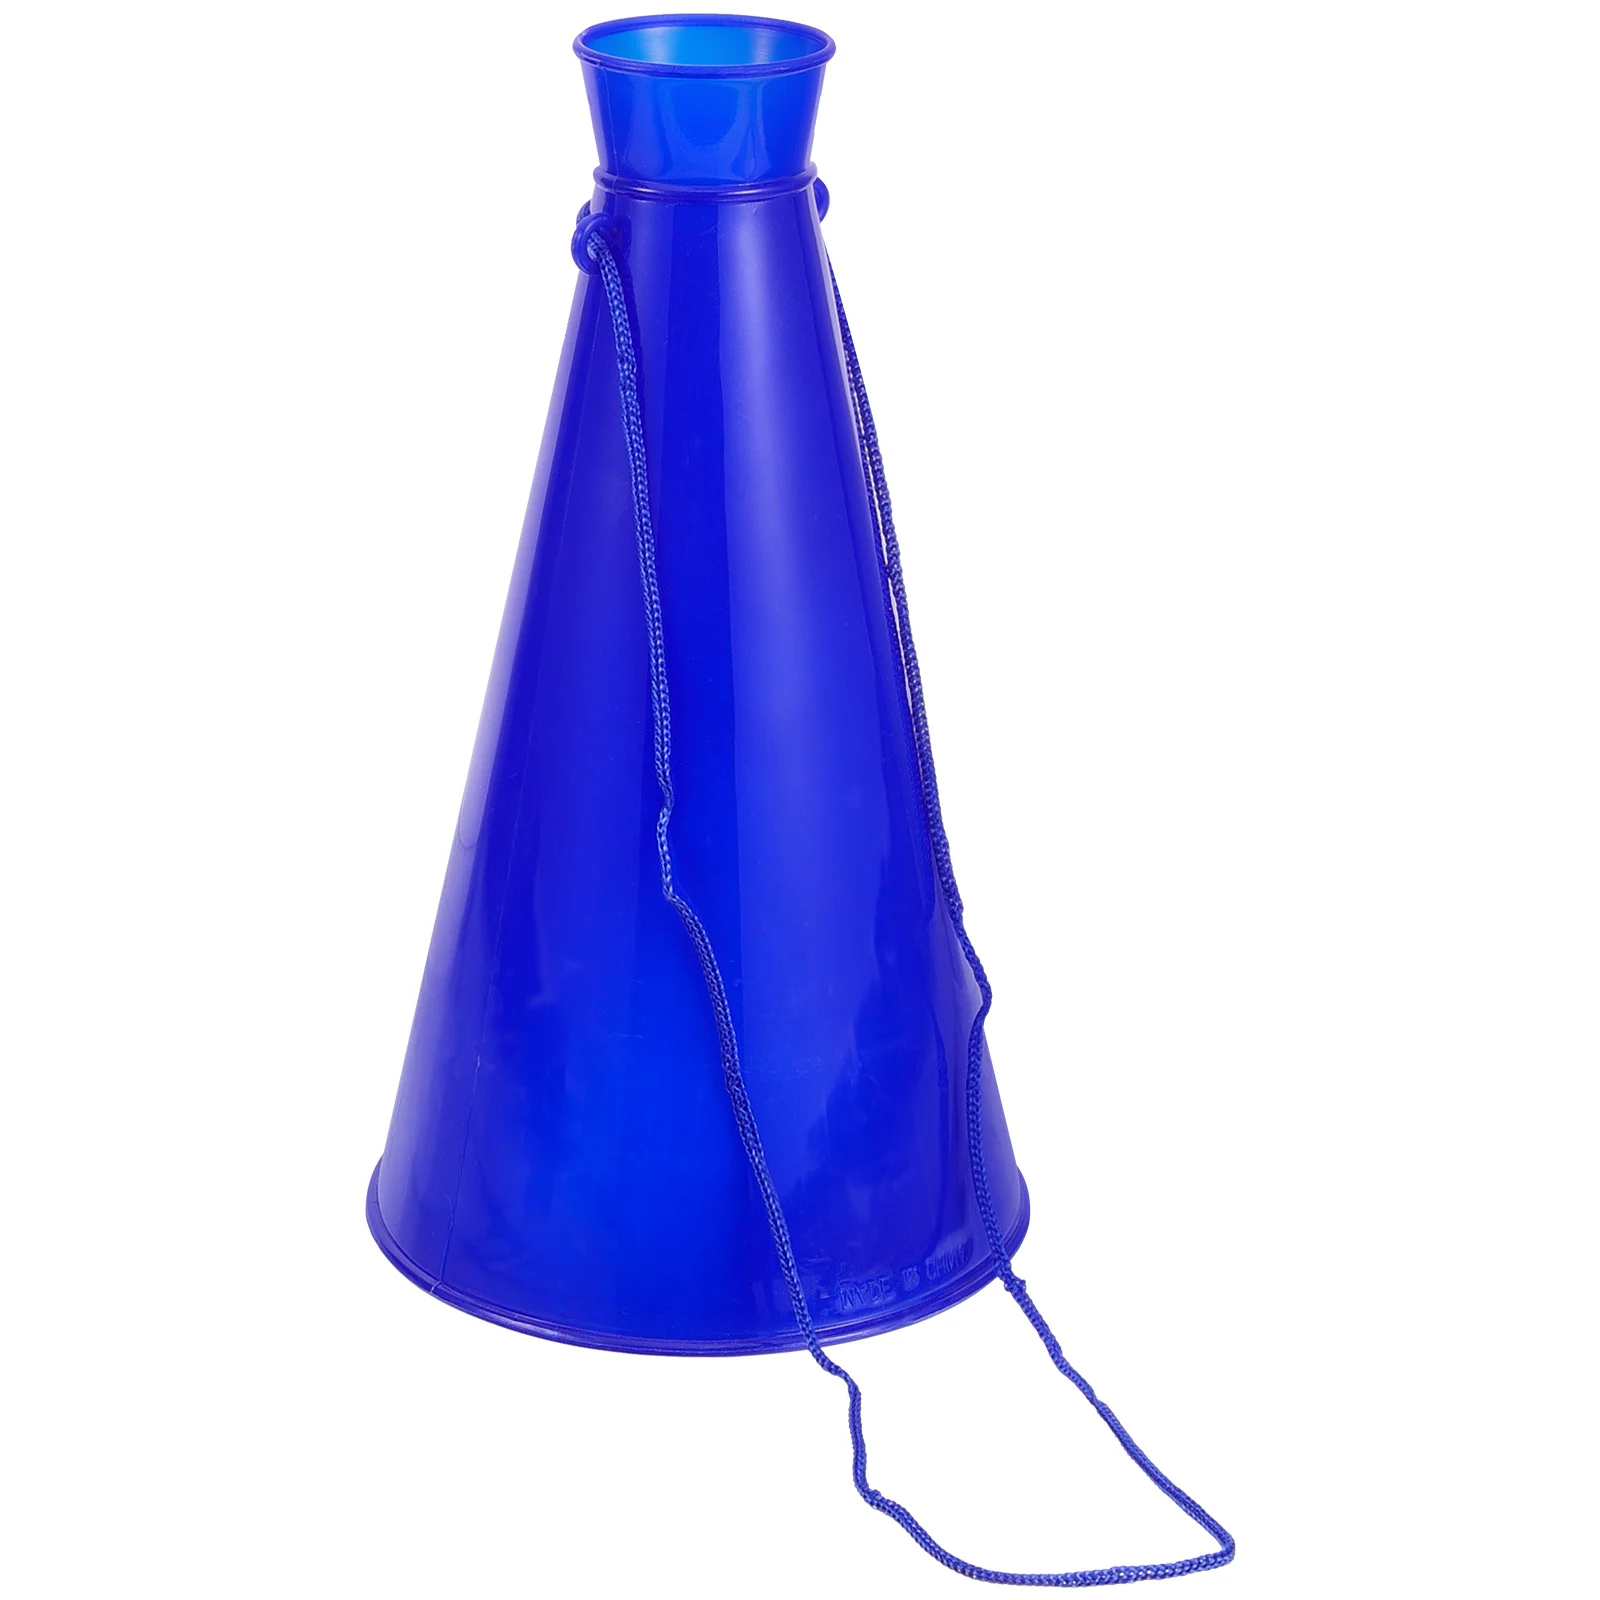 

Cheer Megaphone Portable Plastic Megaphone for Sports Party Atmosphere Prop